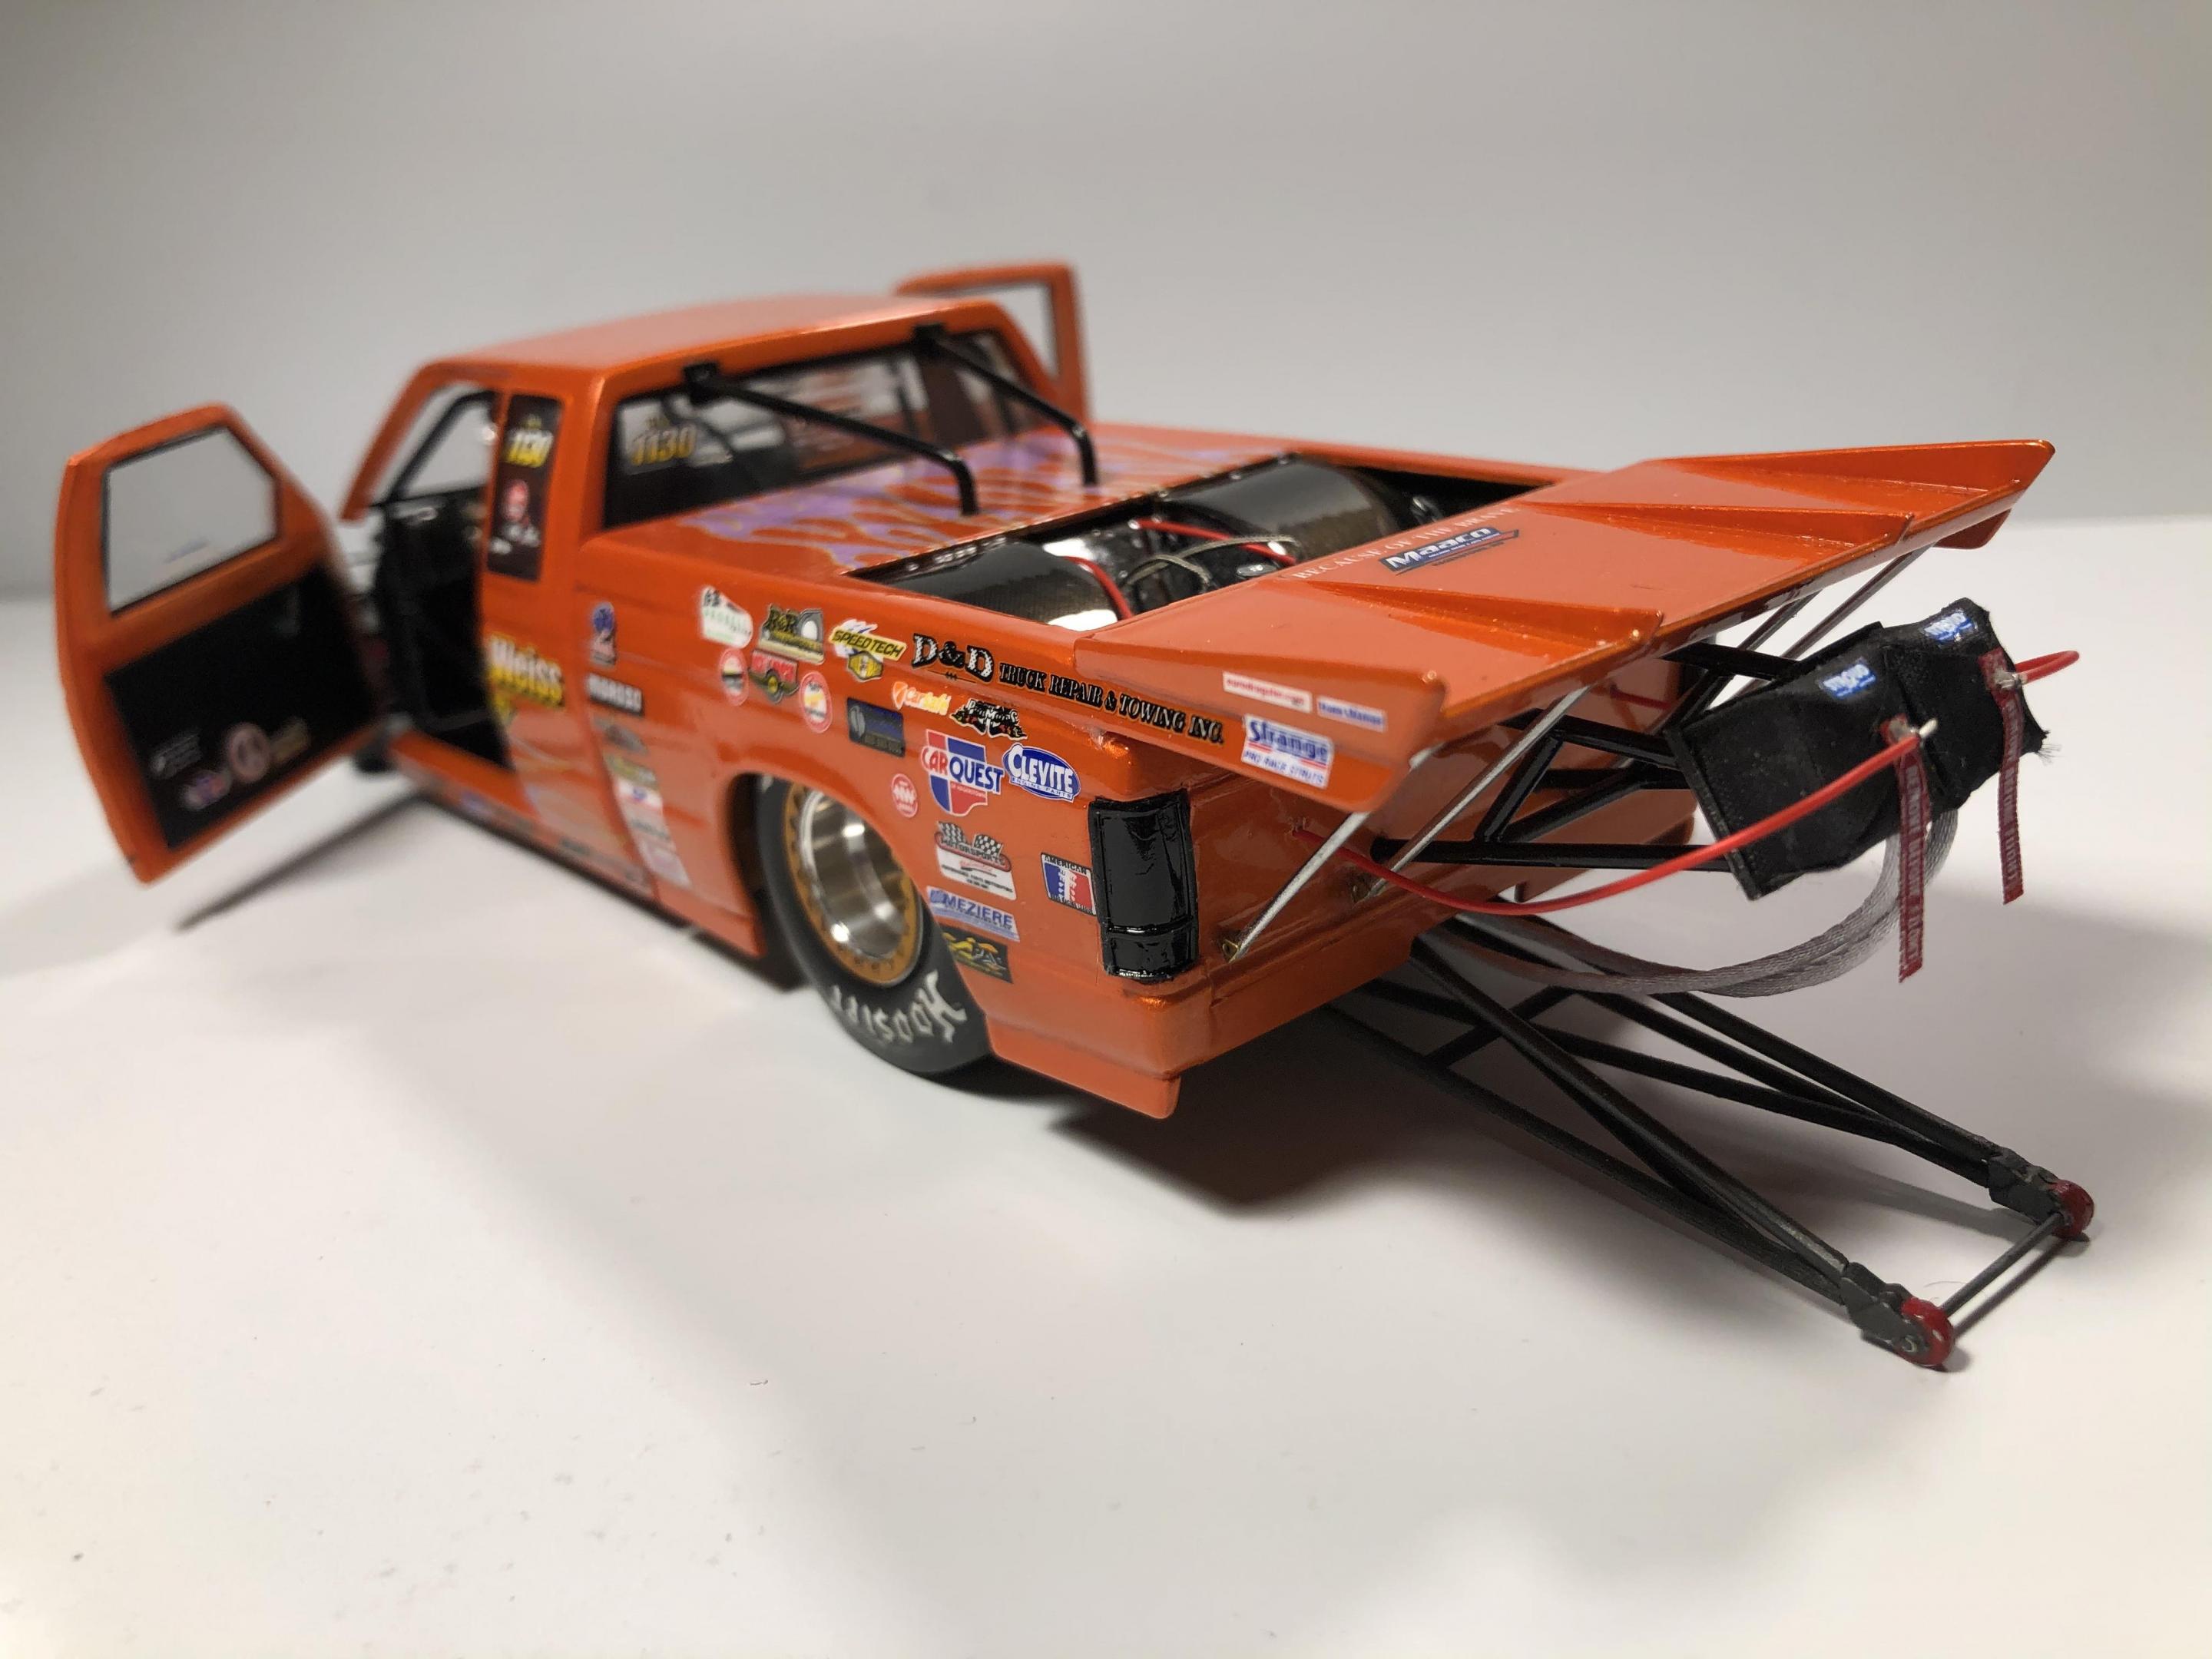 Chevy S10 Pro Mod truck completed! - Drag Racing - Model Cars Magazine